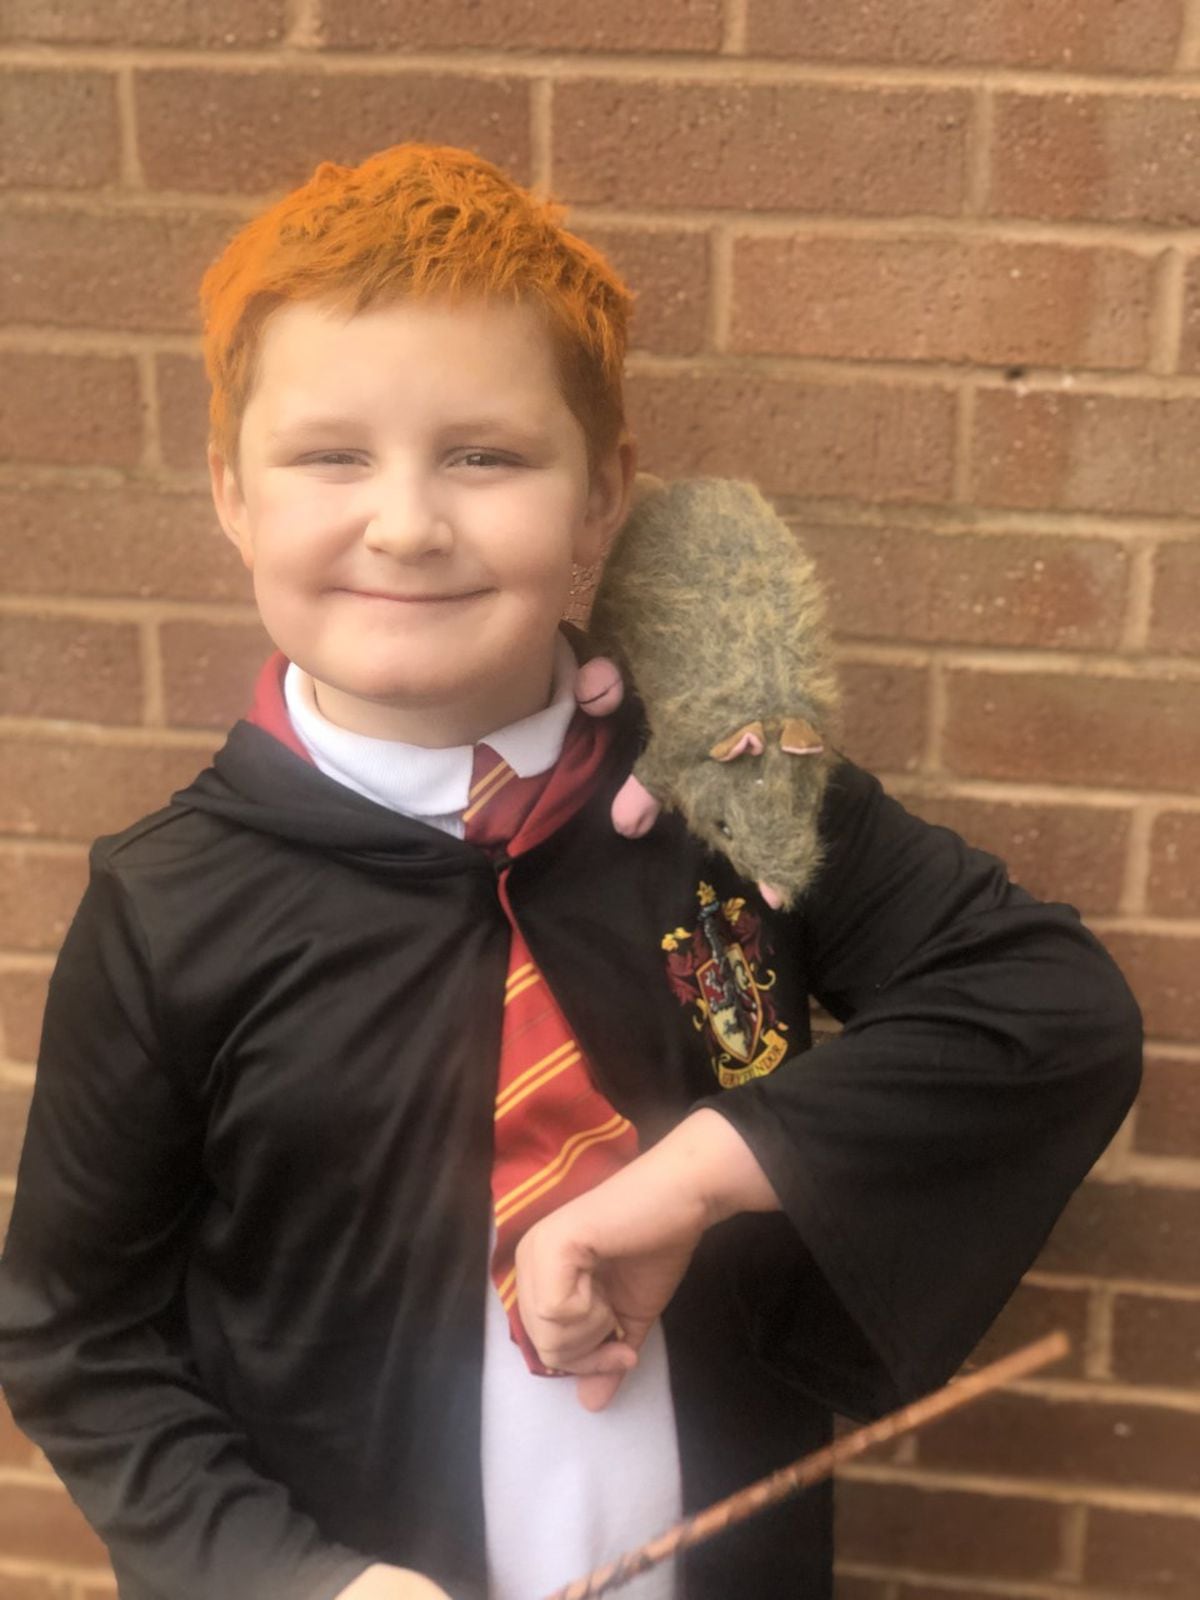 George, from Telford, as Ron Weasley from Harry Potter with Scabbers the Rat